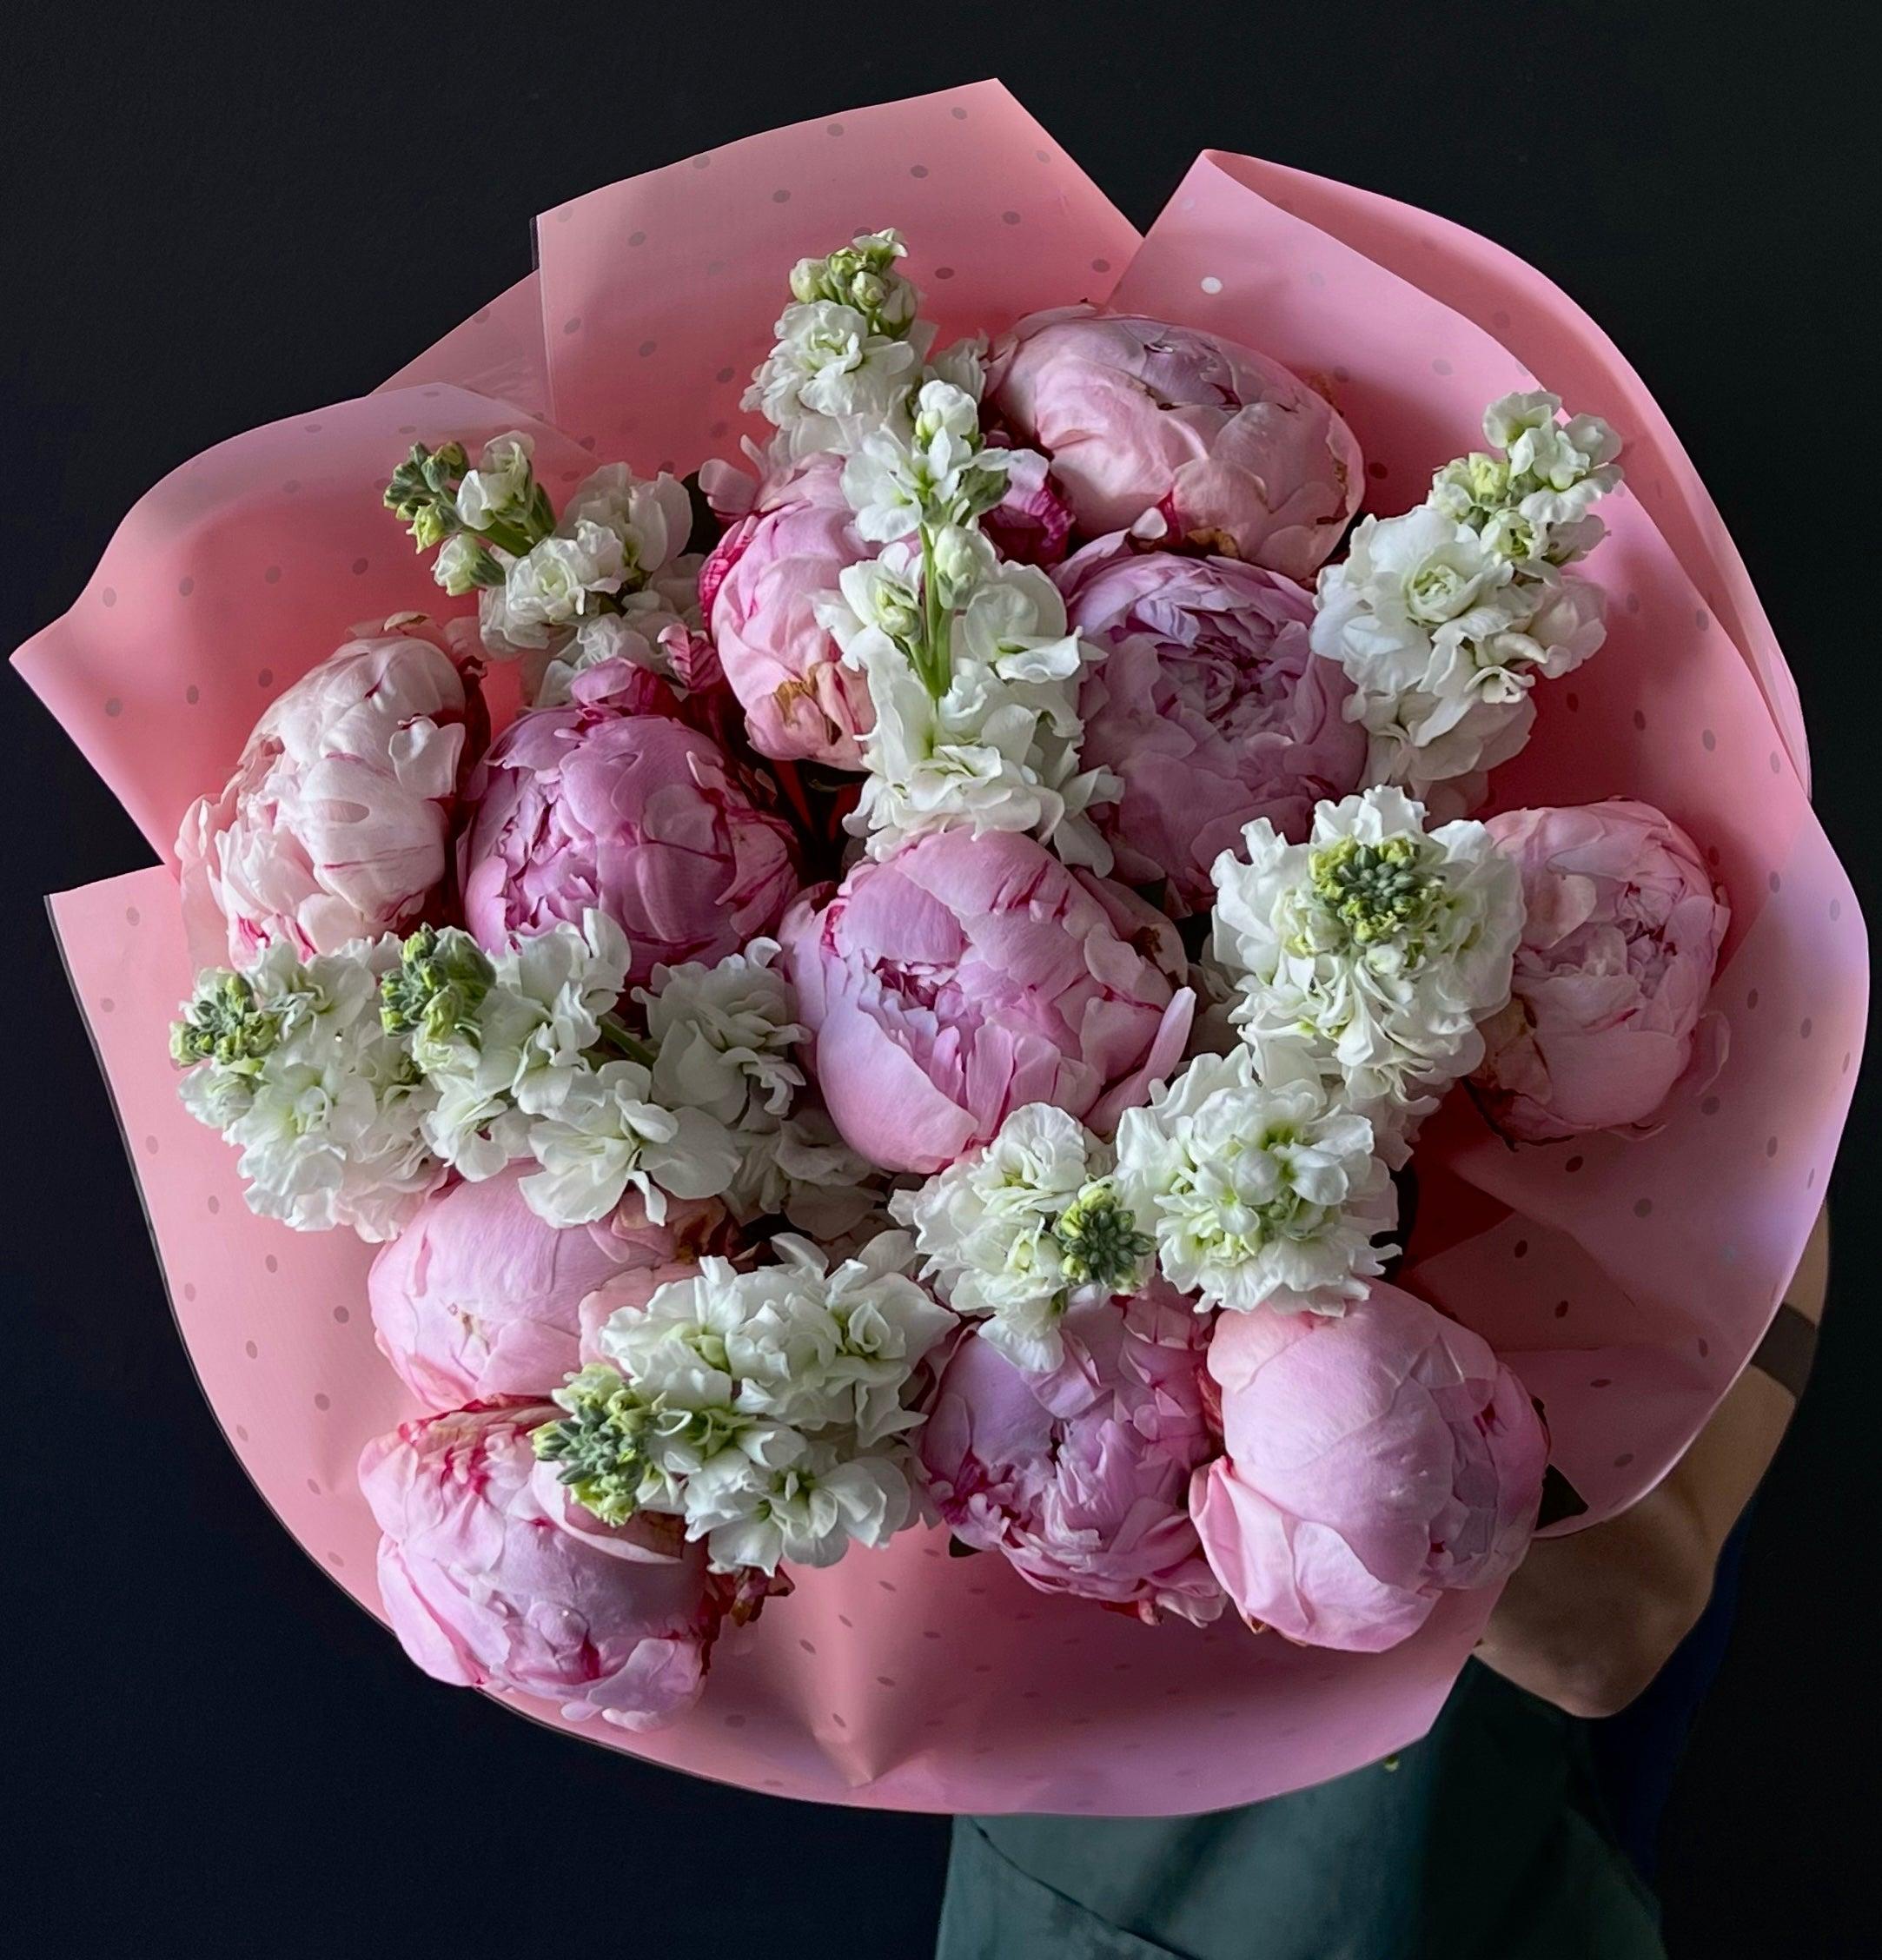 Bouquet “Peonies and Matthiola”